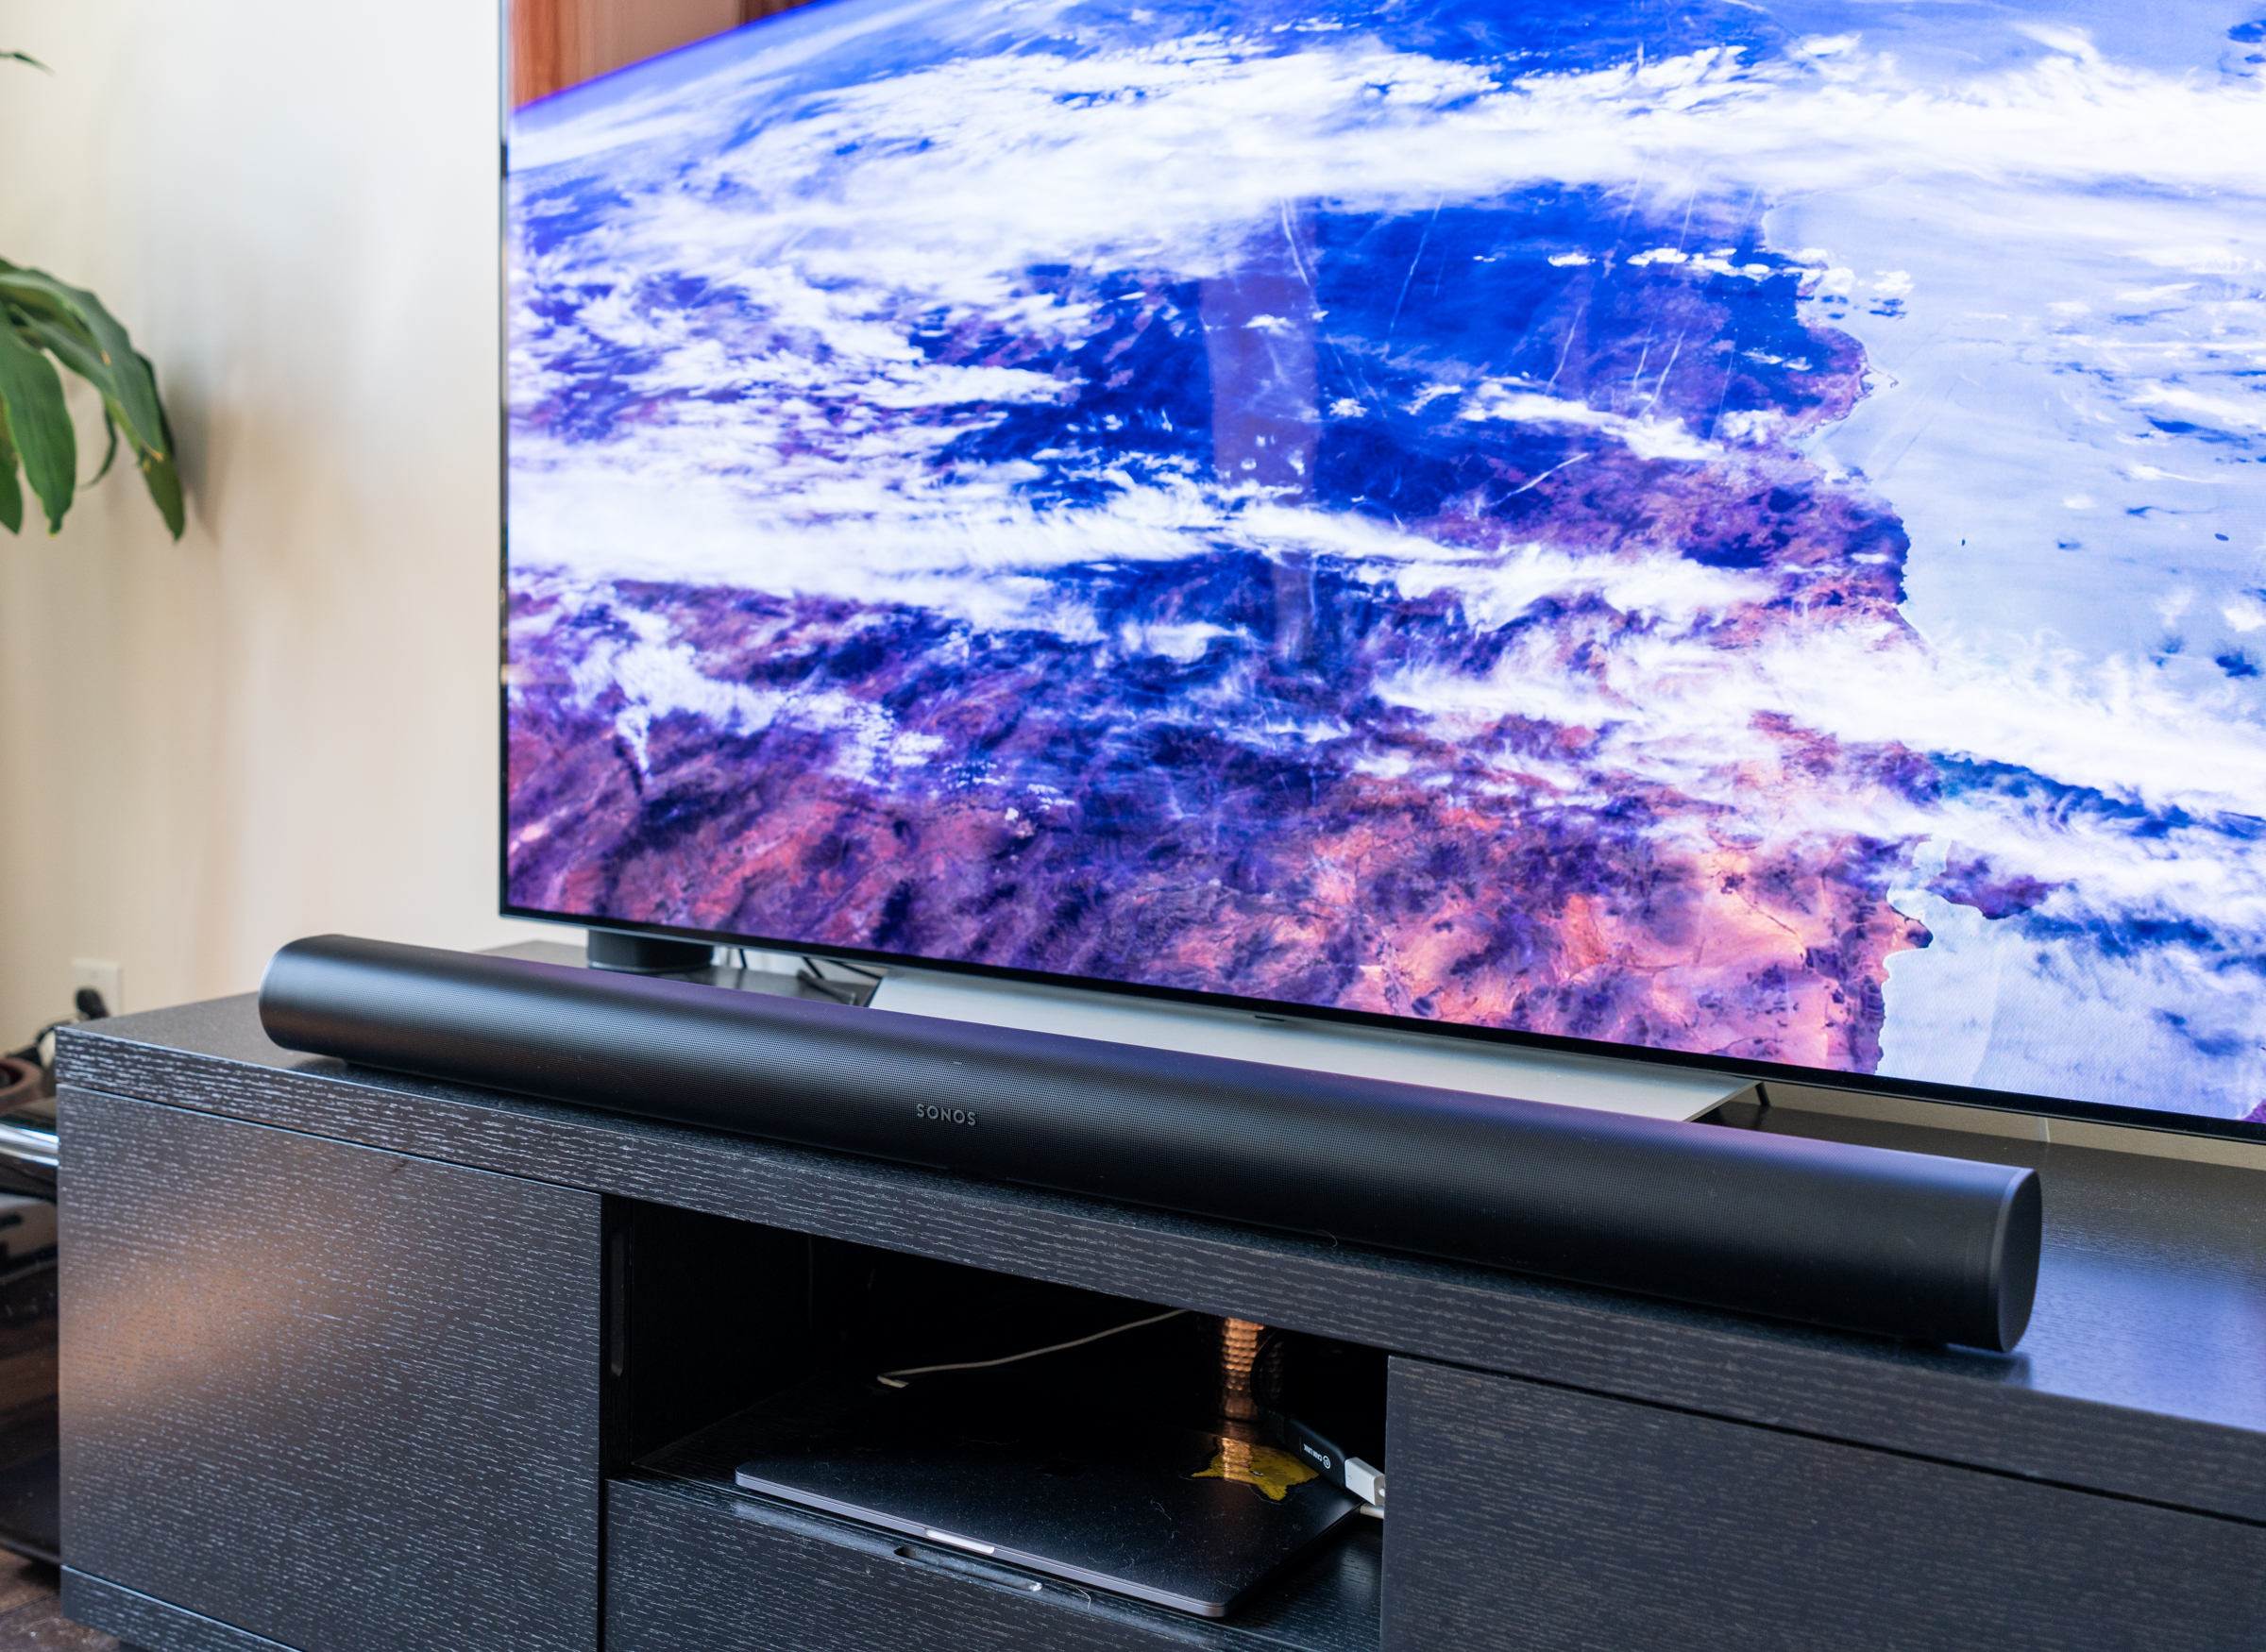 Pekkadillo Disco kiwi The Sonos Arc is an outstanding soundbar, on its own or with friends |  TechCrunch